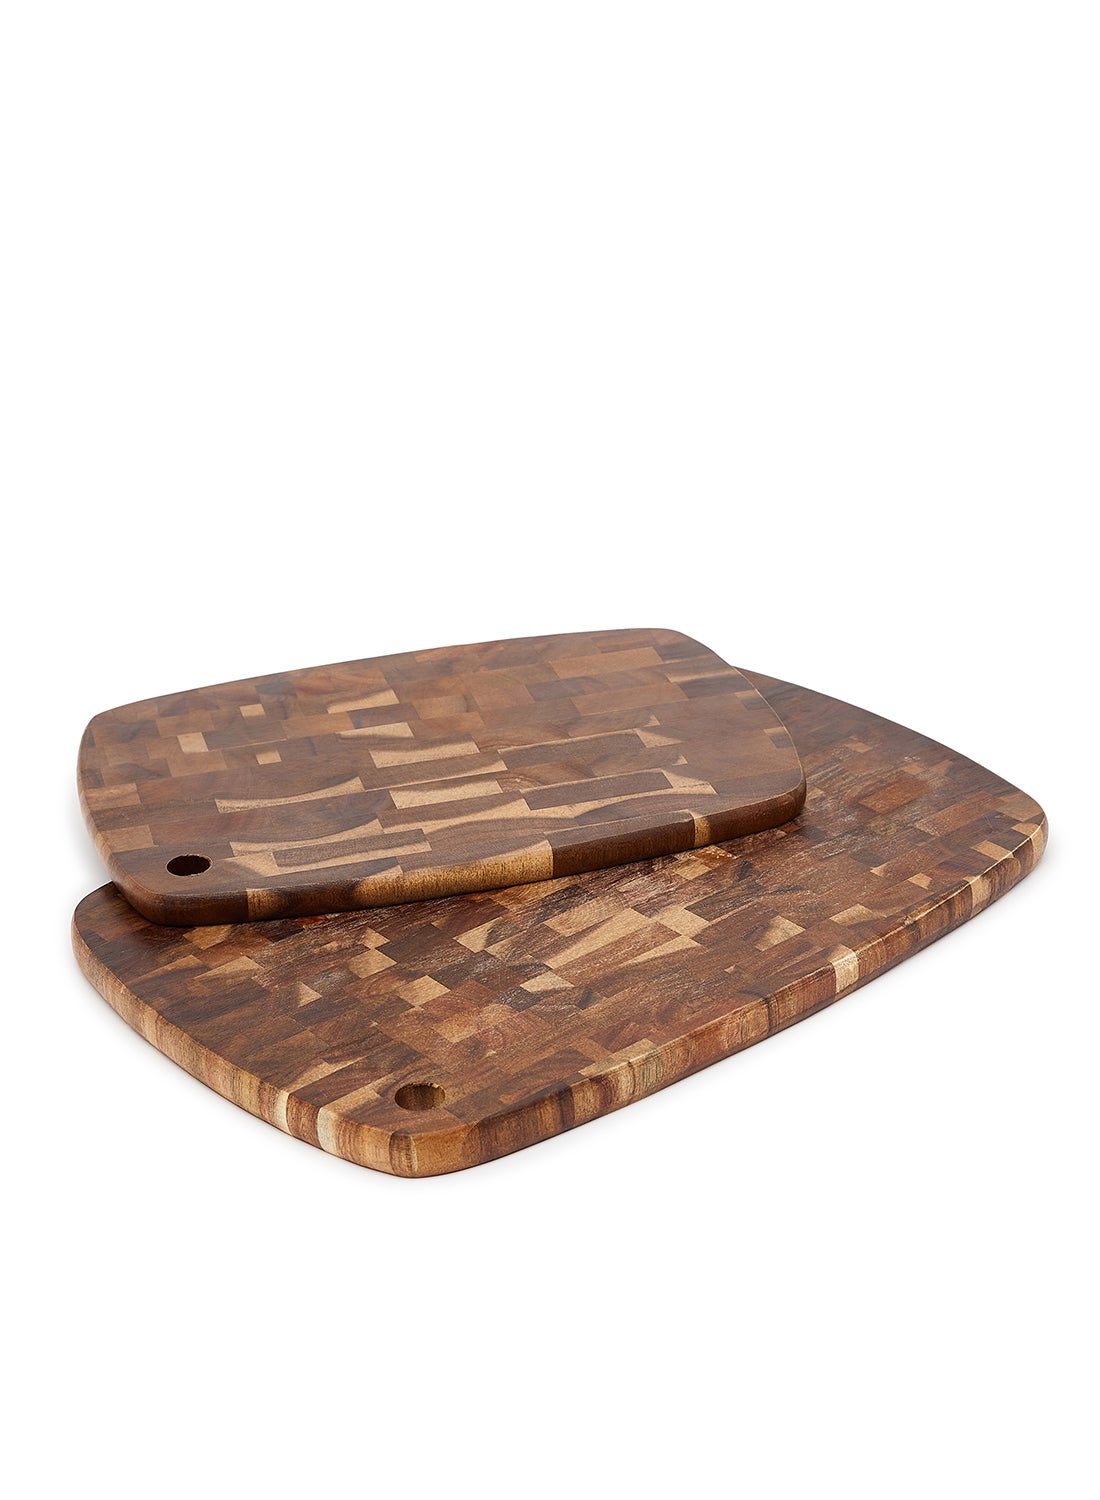 2 Piece Serving Board - Made Of Acacia Wood - Premium Quality - Serving Plate - Serving Dishes - Tray - Wood Platter - By Noon East - Dark Brown M:32x22x1.5 cm L:40x28x2 cm 